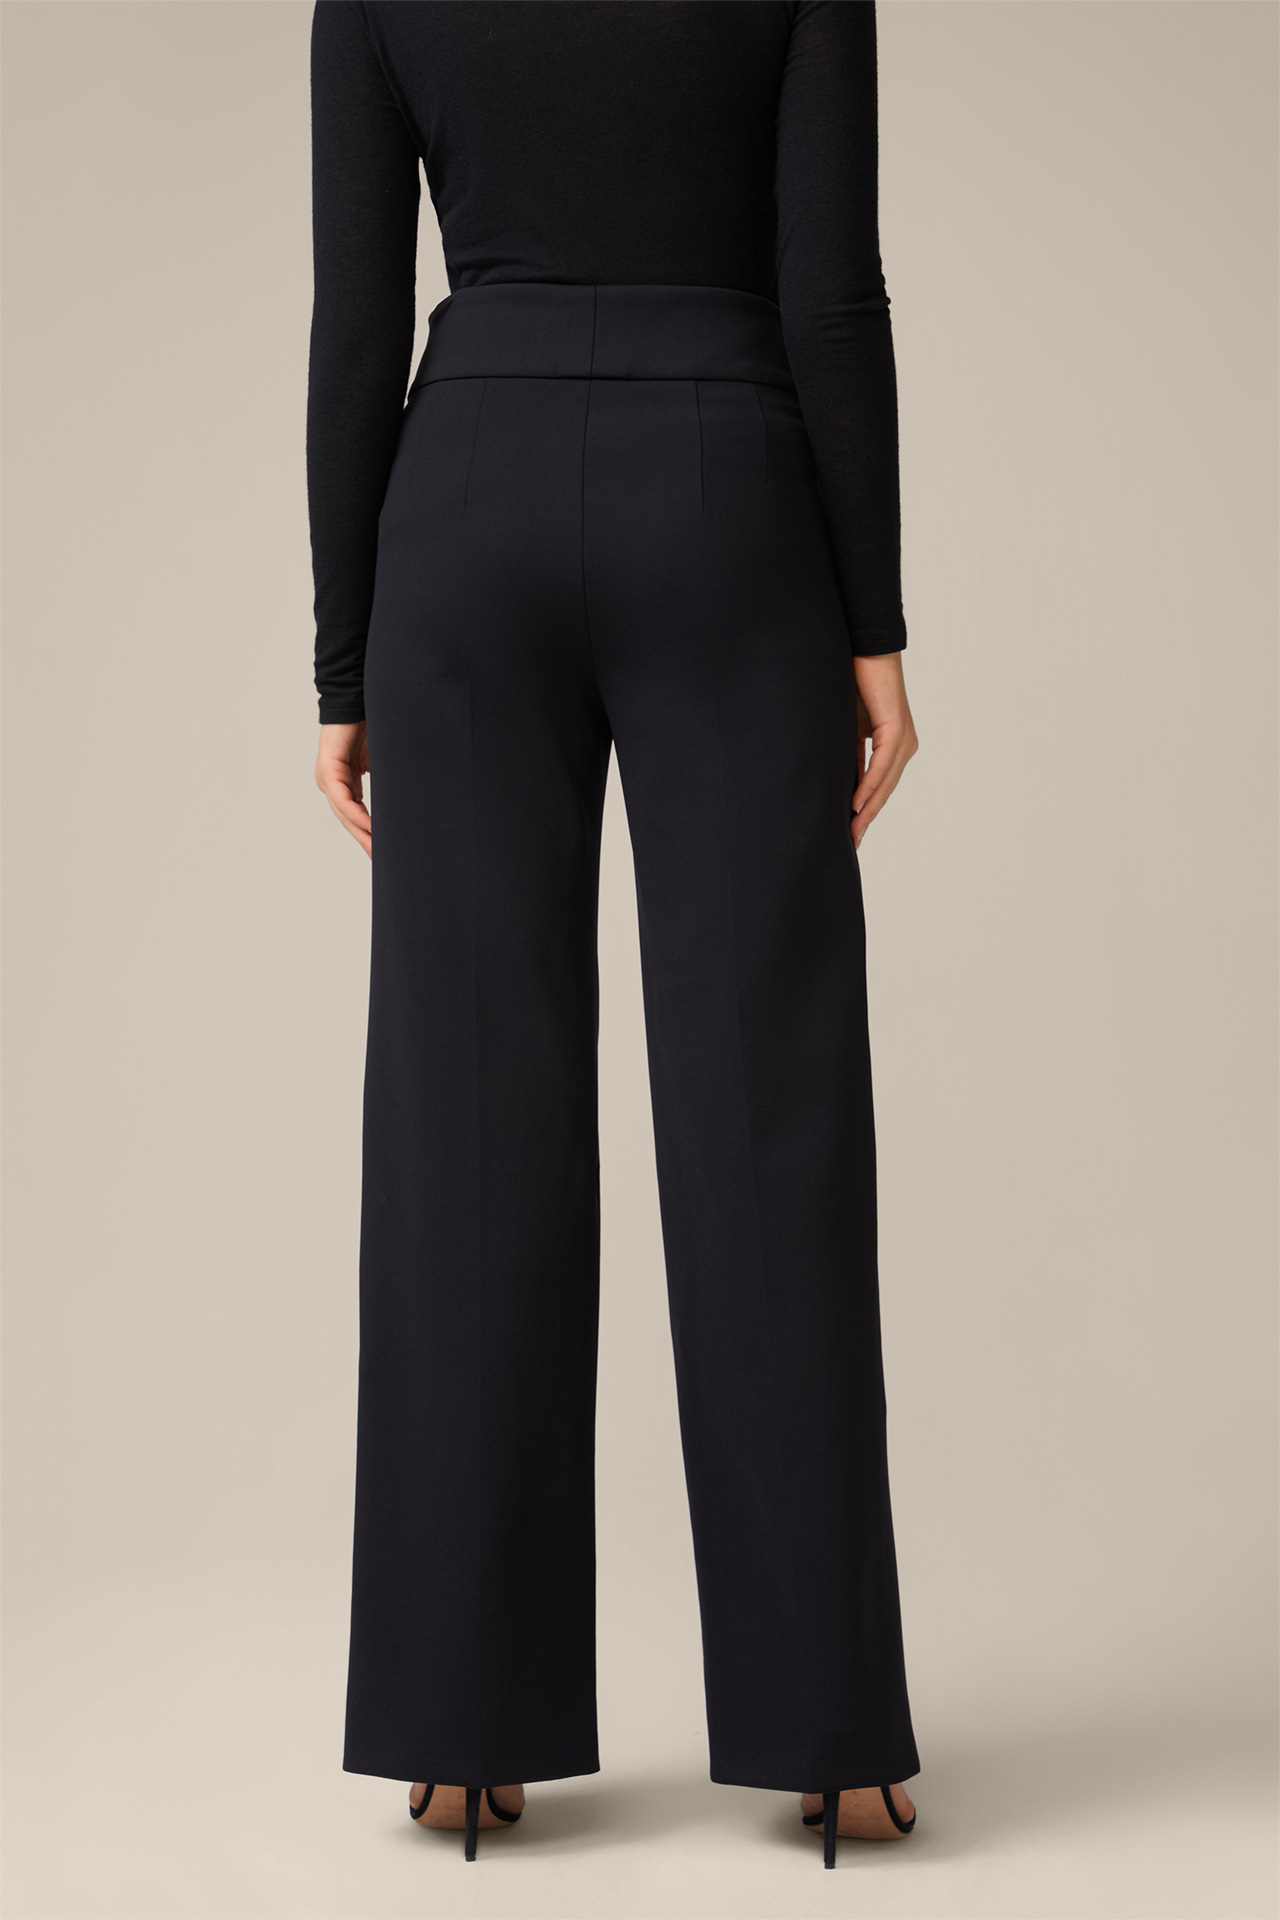 Techno Jersey Palazzo Trousers in Black